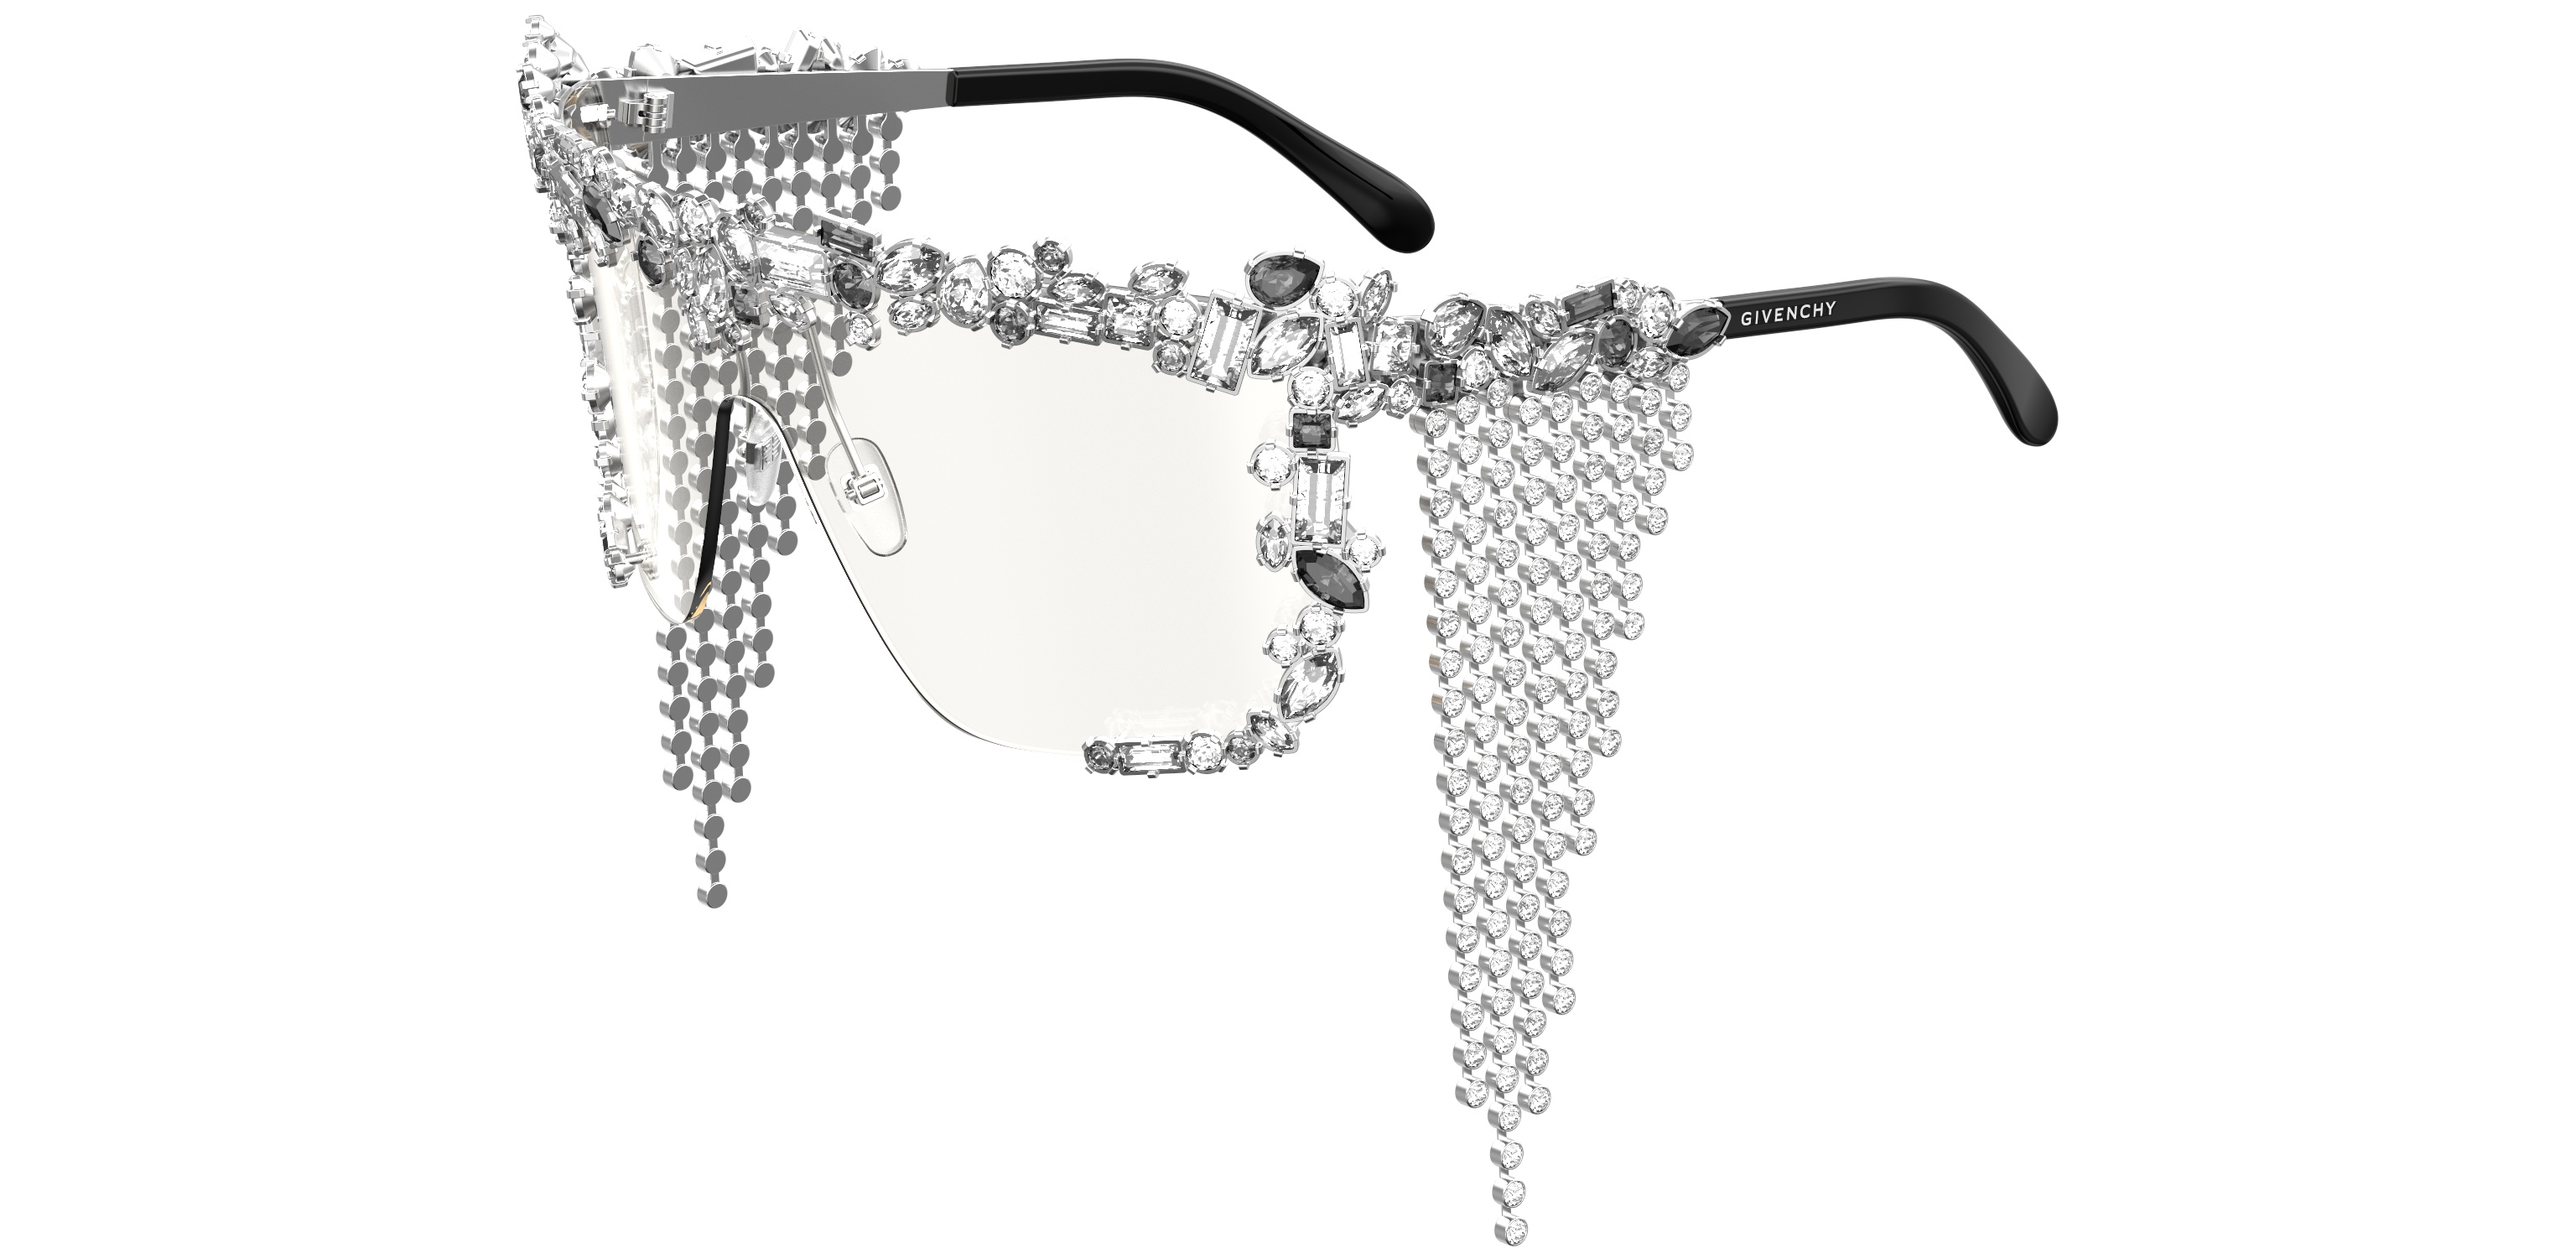 GIVENCHY EYEWEAR COLLECTION SPRING 